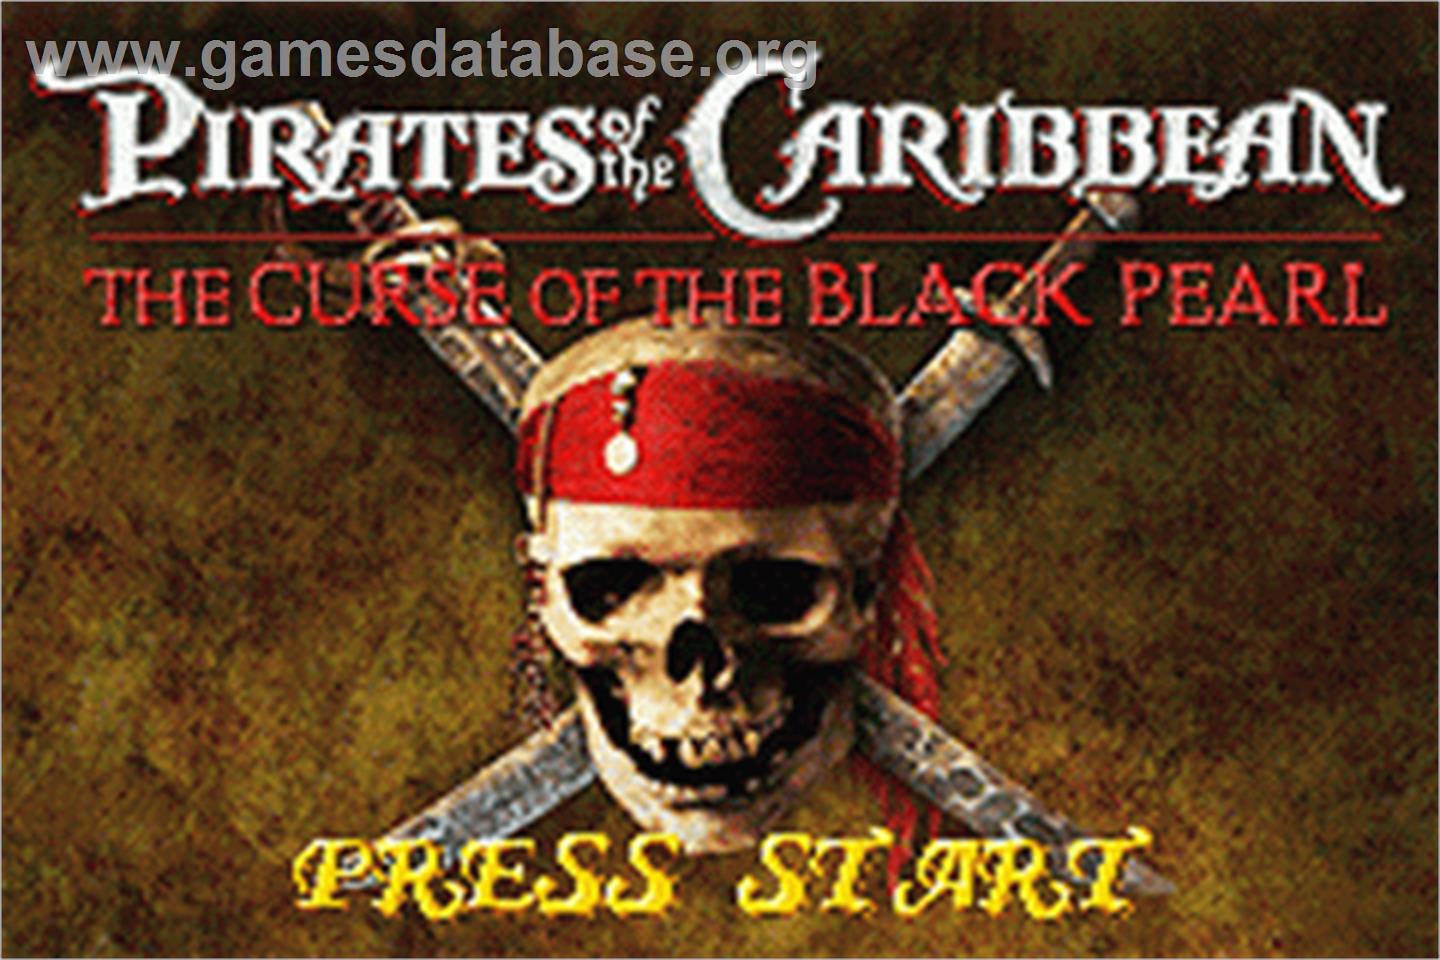 Pirates of the Caribbean: The Curse of the Black Pearl - Nintendo Game Boy Advance - Artwork - Title Screen